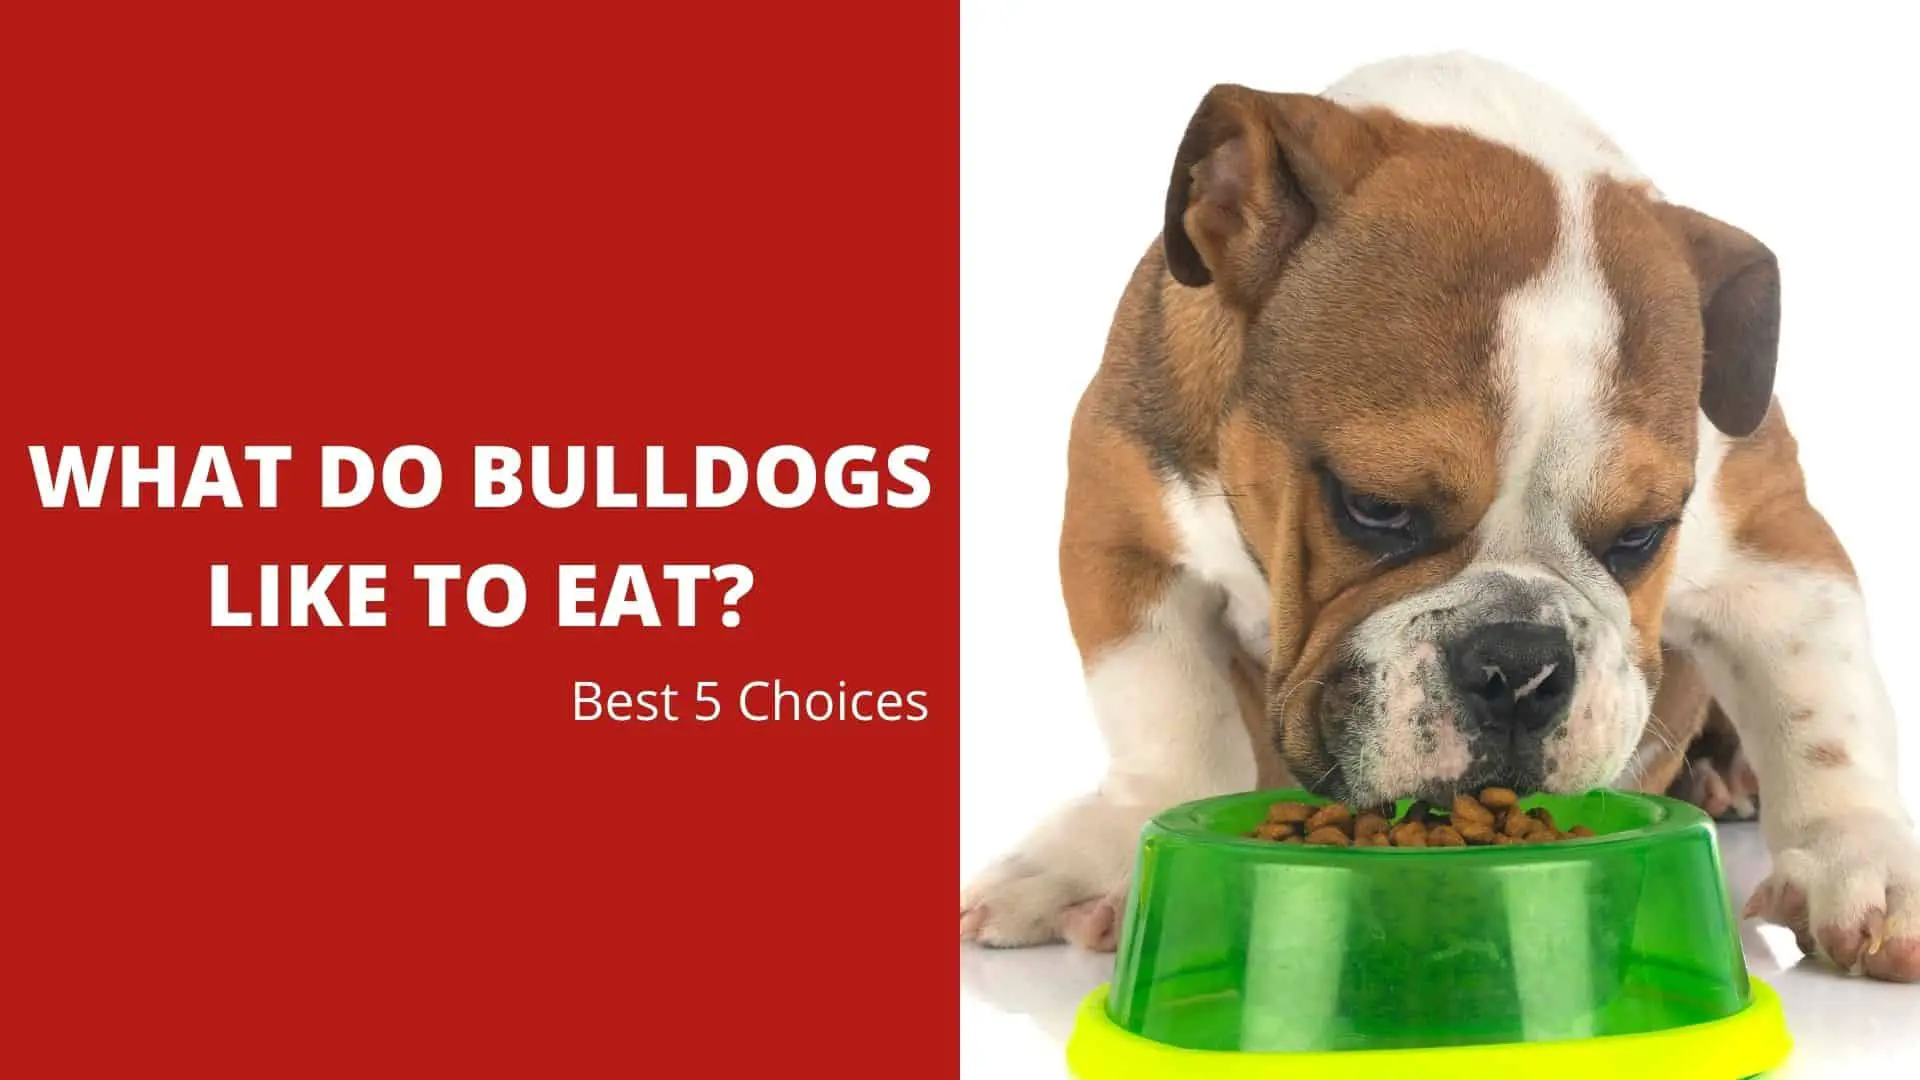 What Do Bulldogs Like To Eat? Best 5 Choices